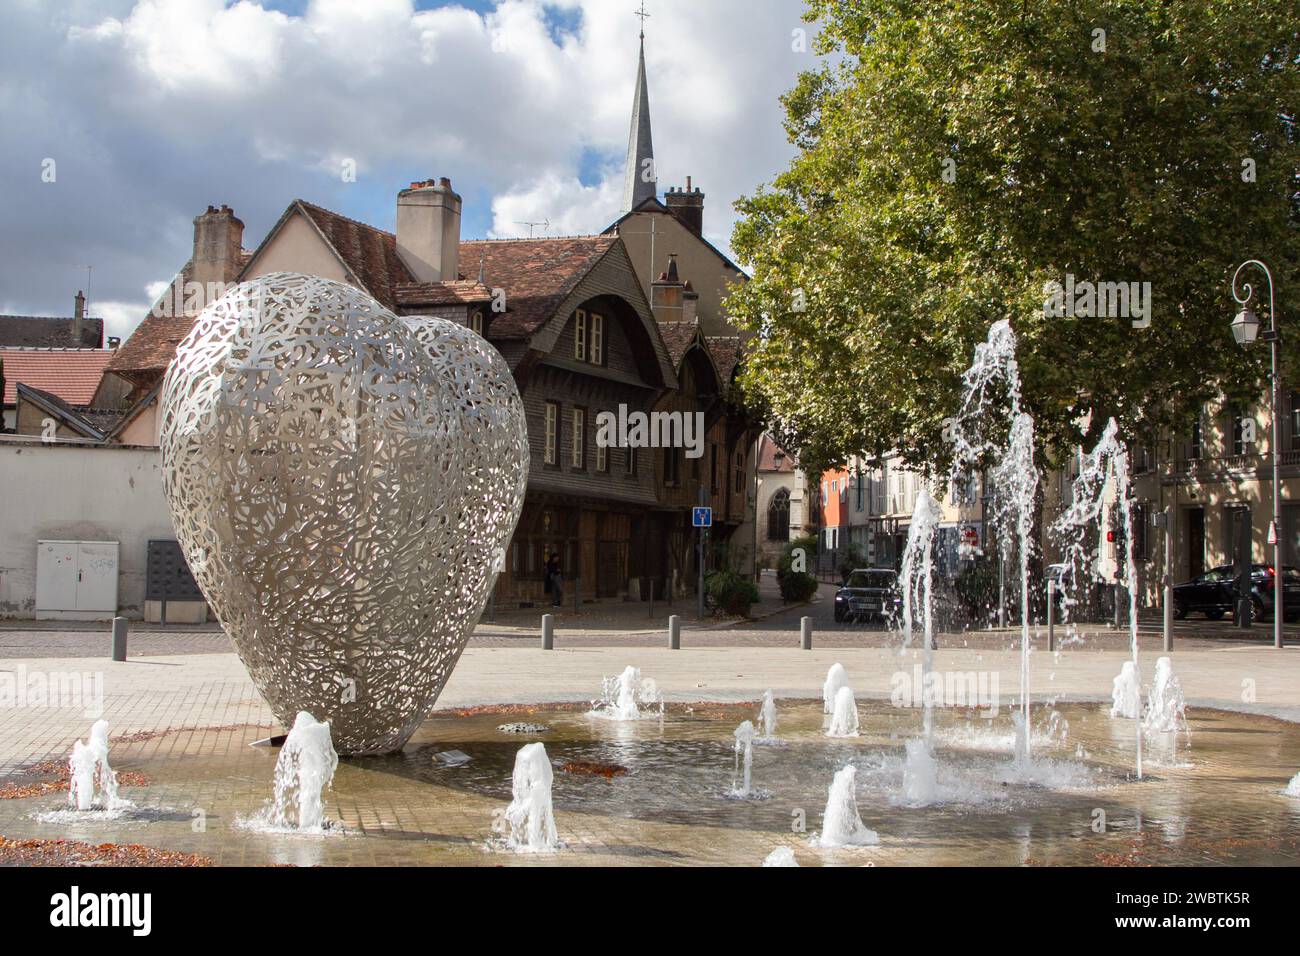 The heart of Troyes, France, a 2-tonne, 3.5m high sculpture by local artists Michèle and Thierry Kayo-Houël is set in the historic city centre. Stock Photo